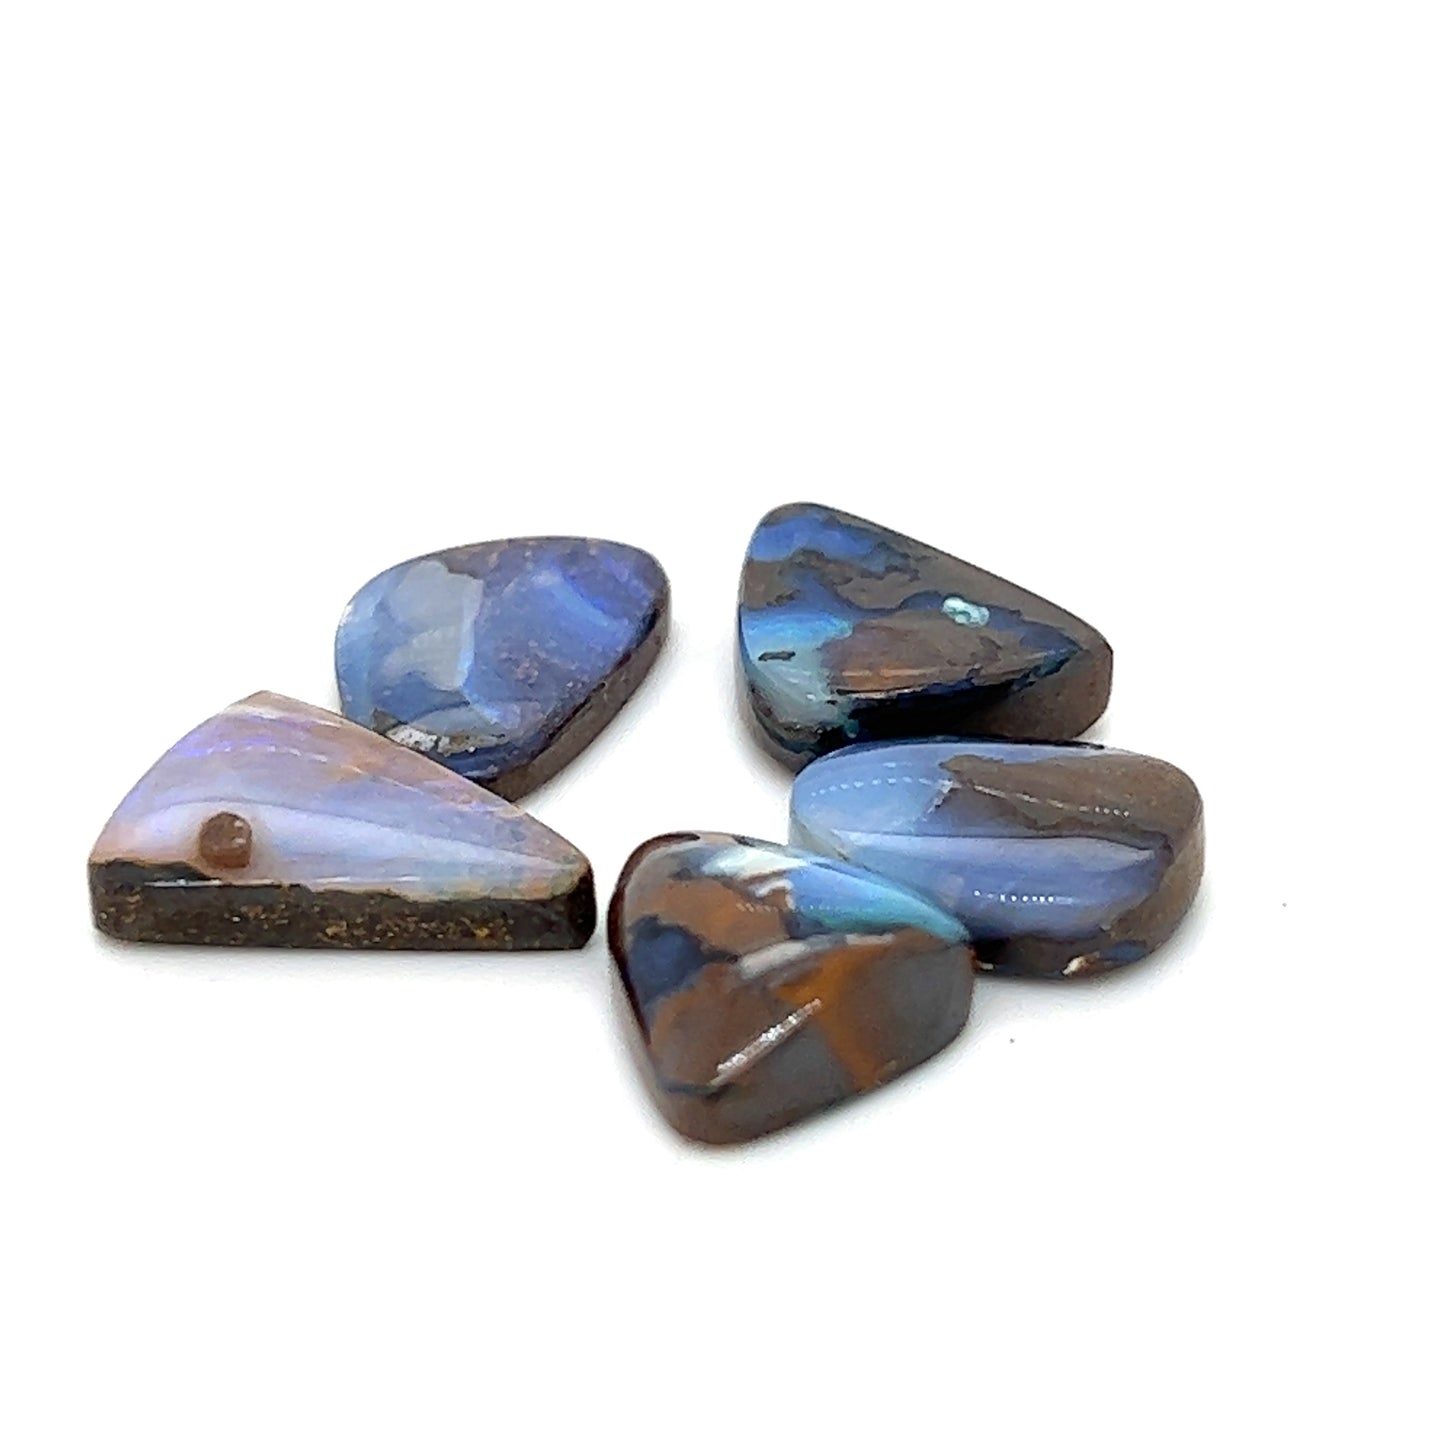 Great cut and polish on this bundle of five boulder opals. Perfect for rings or pendants.